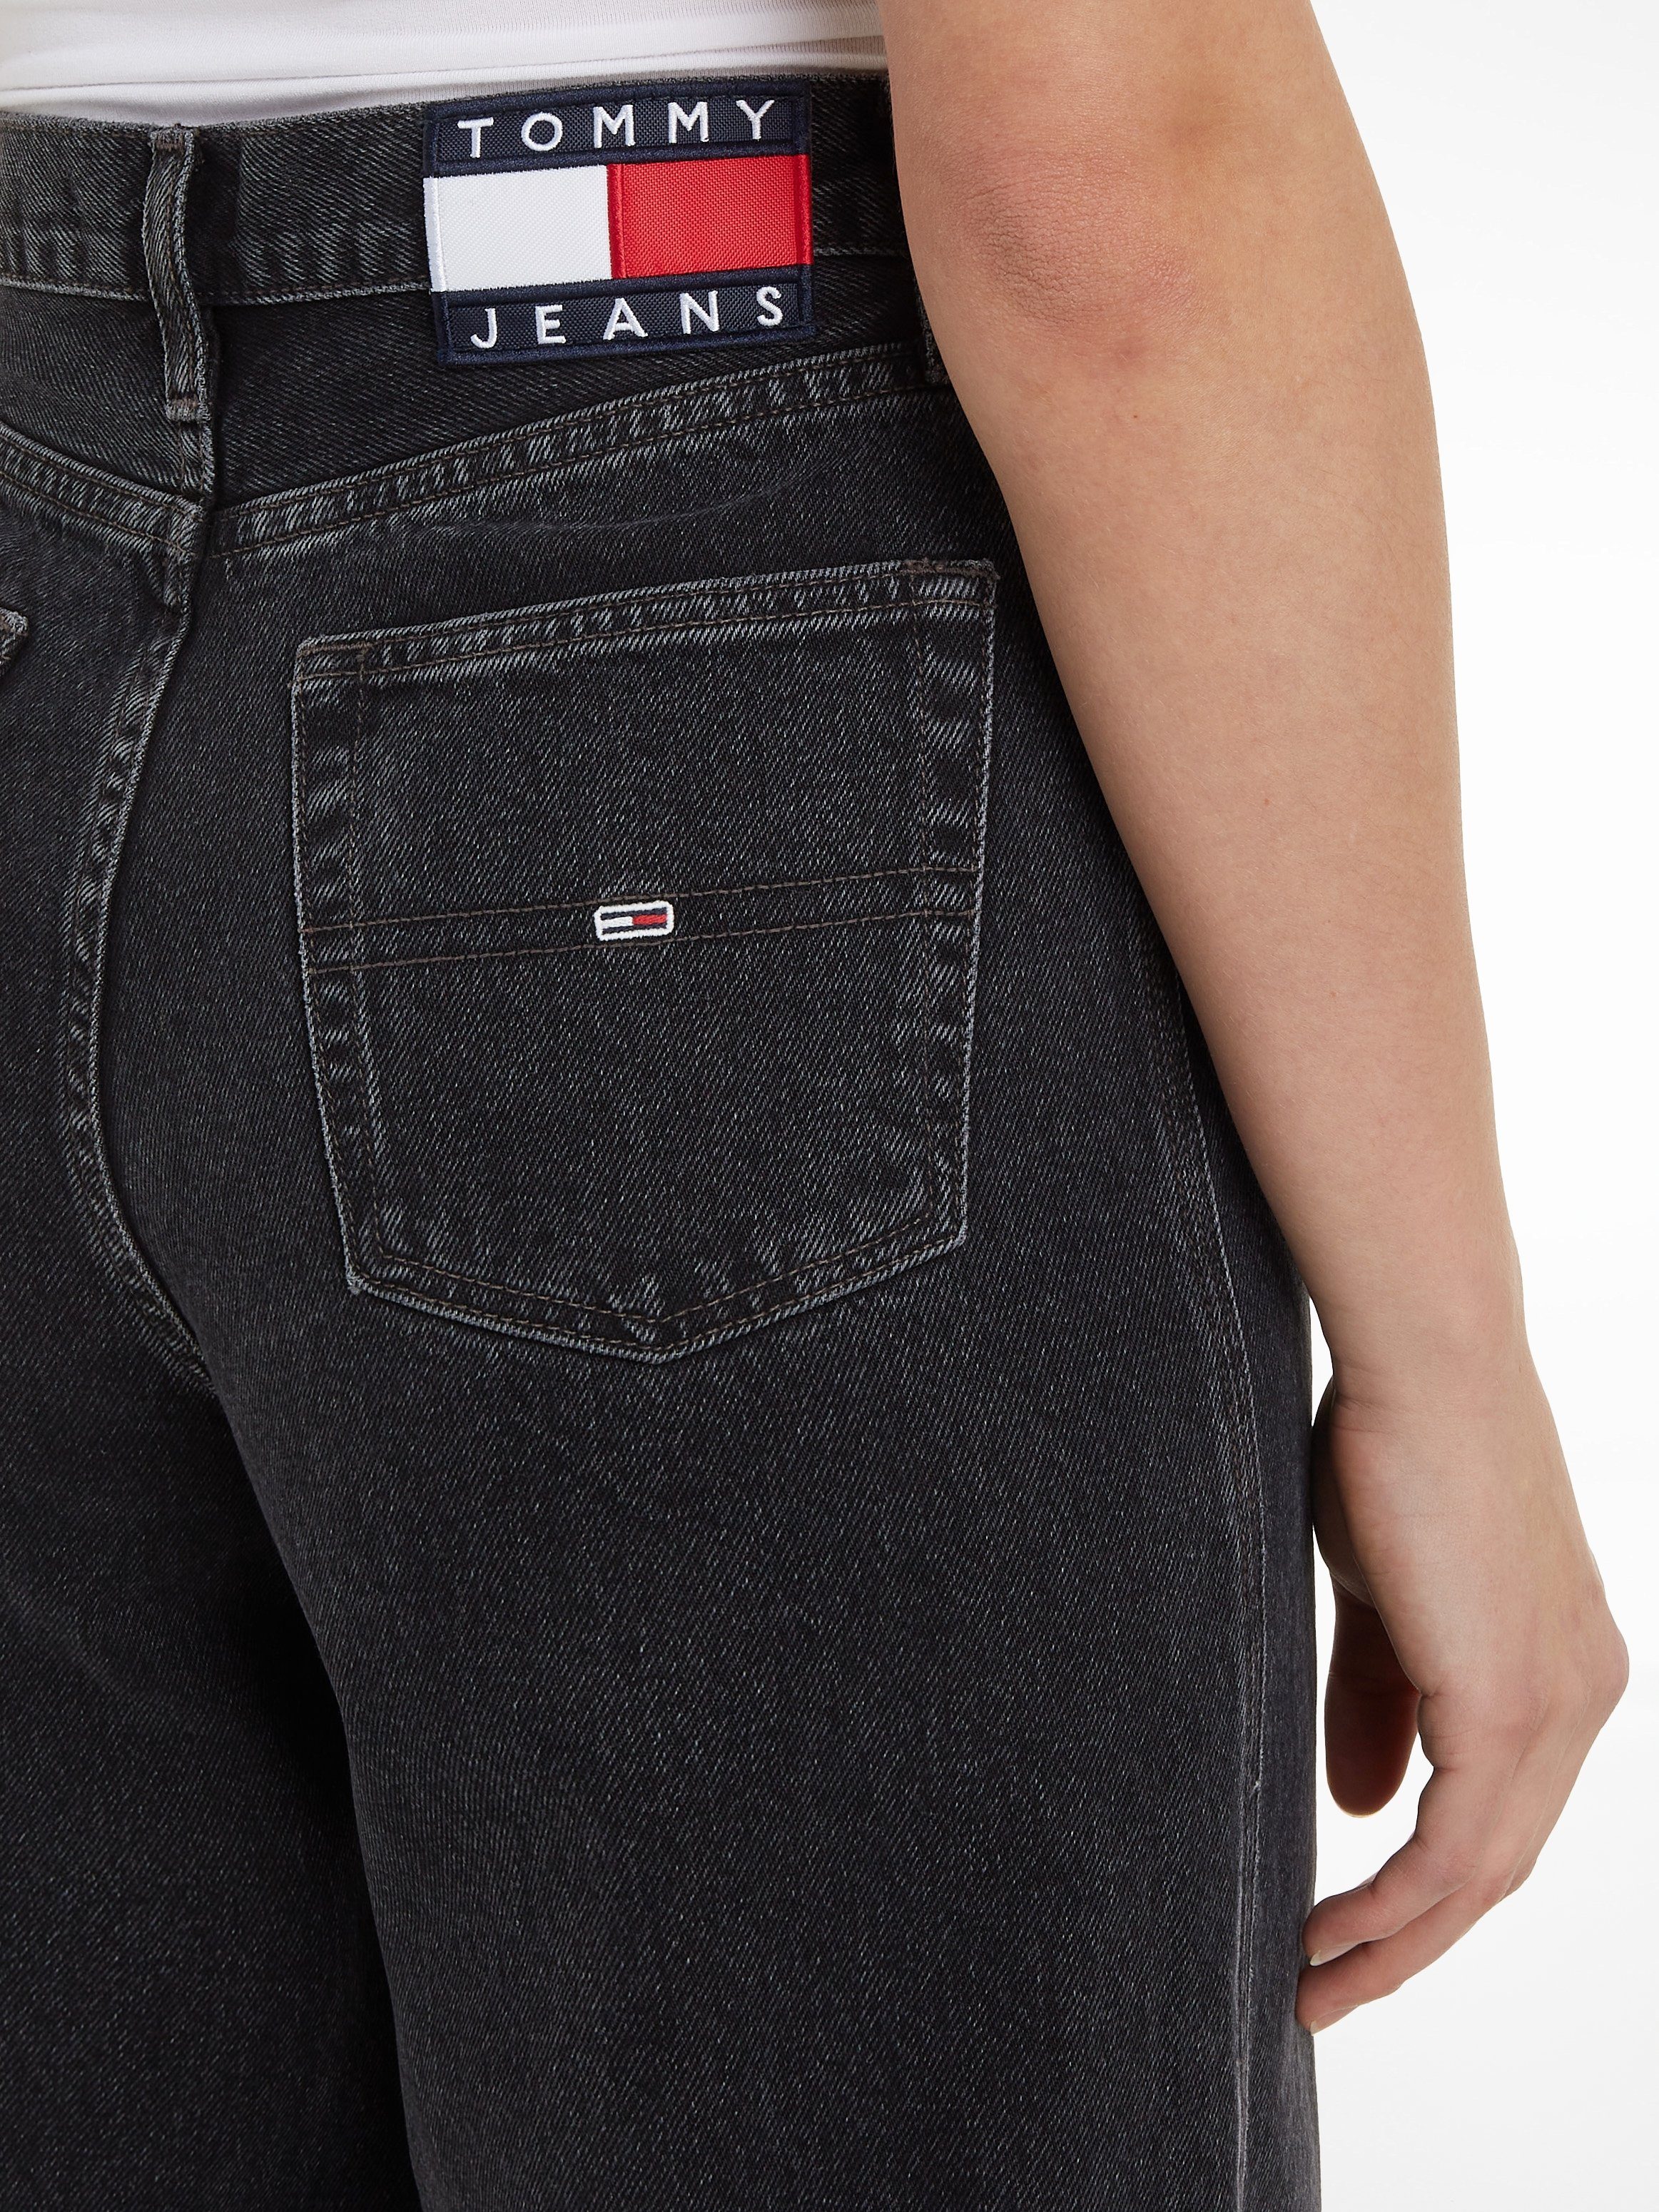 Jeans Weite black mit Logobadges Jeans Tommy Tommy Jeans